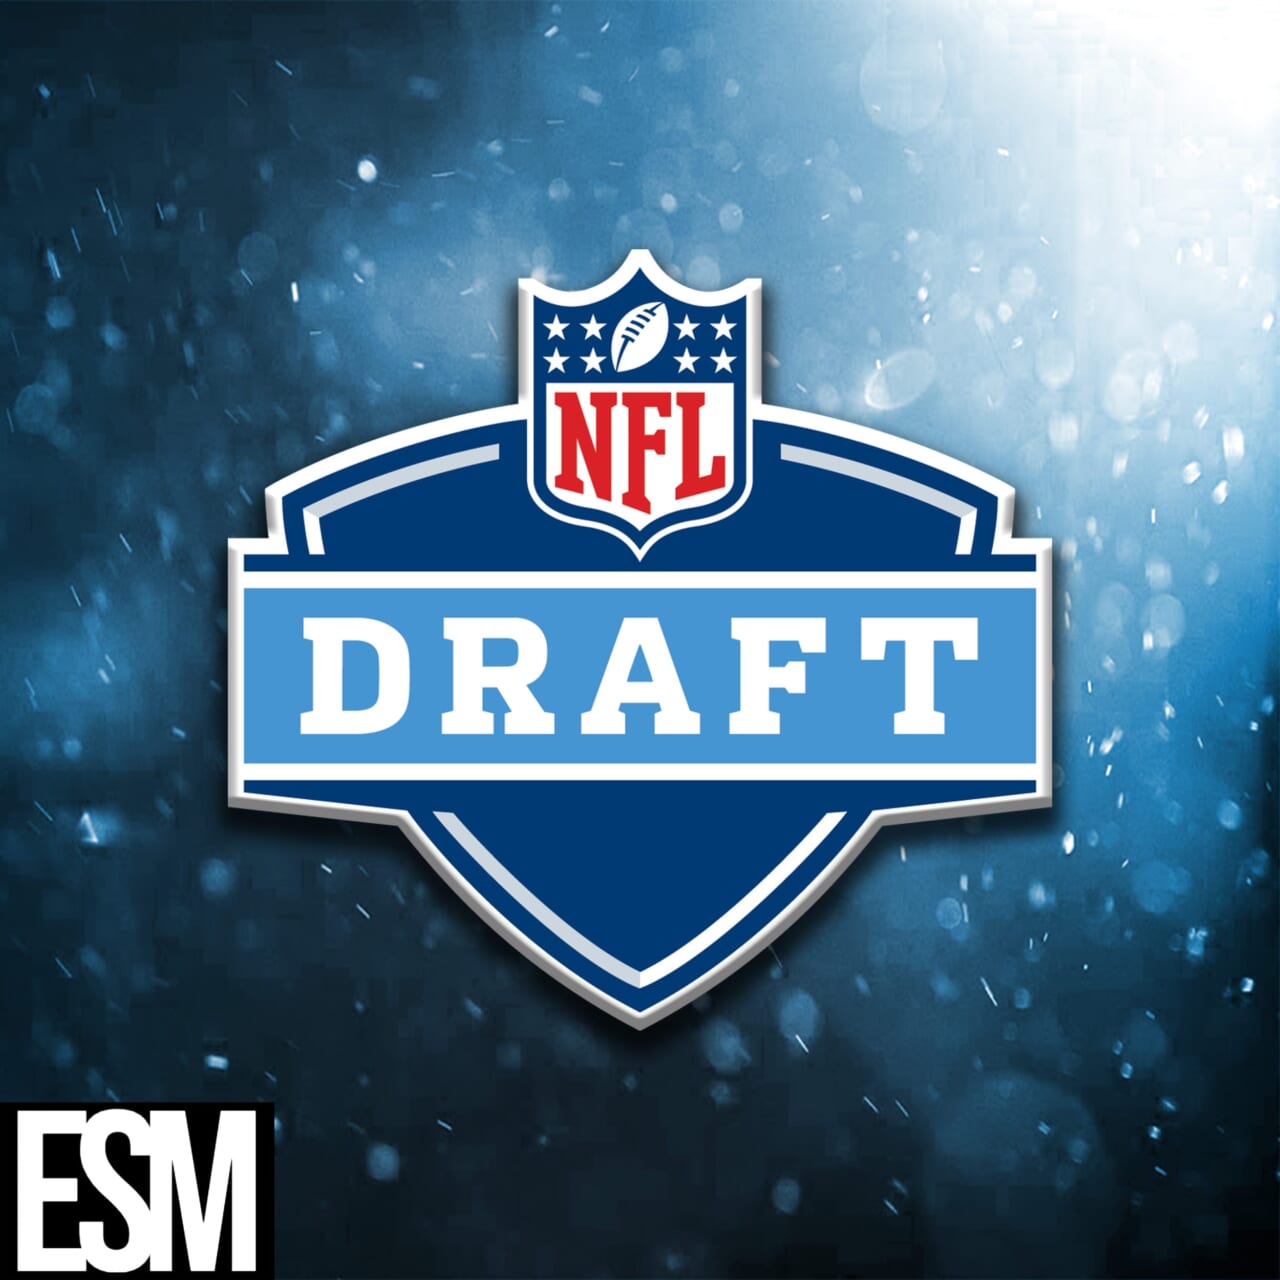 NFL Draft Day Rumors: Giants on the Move?